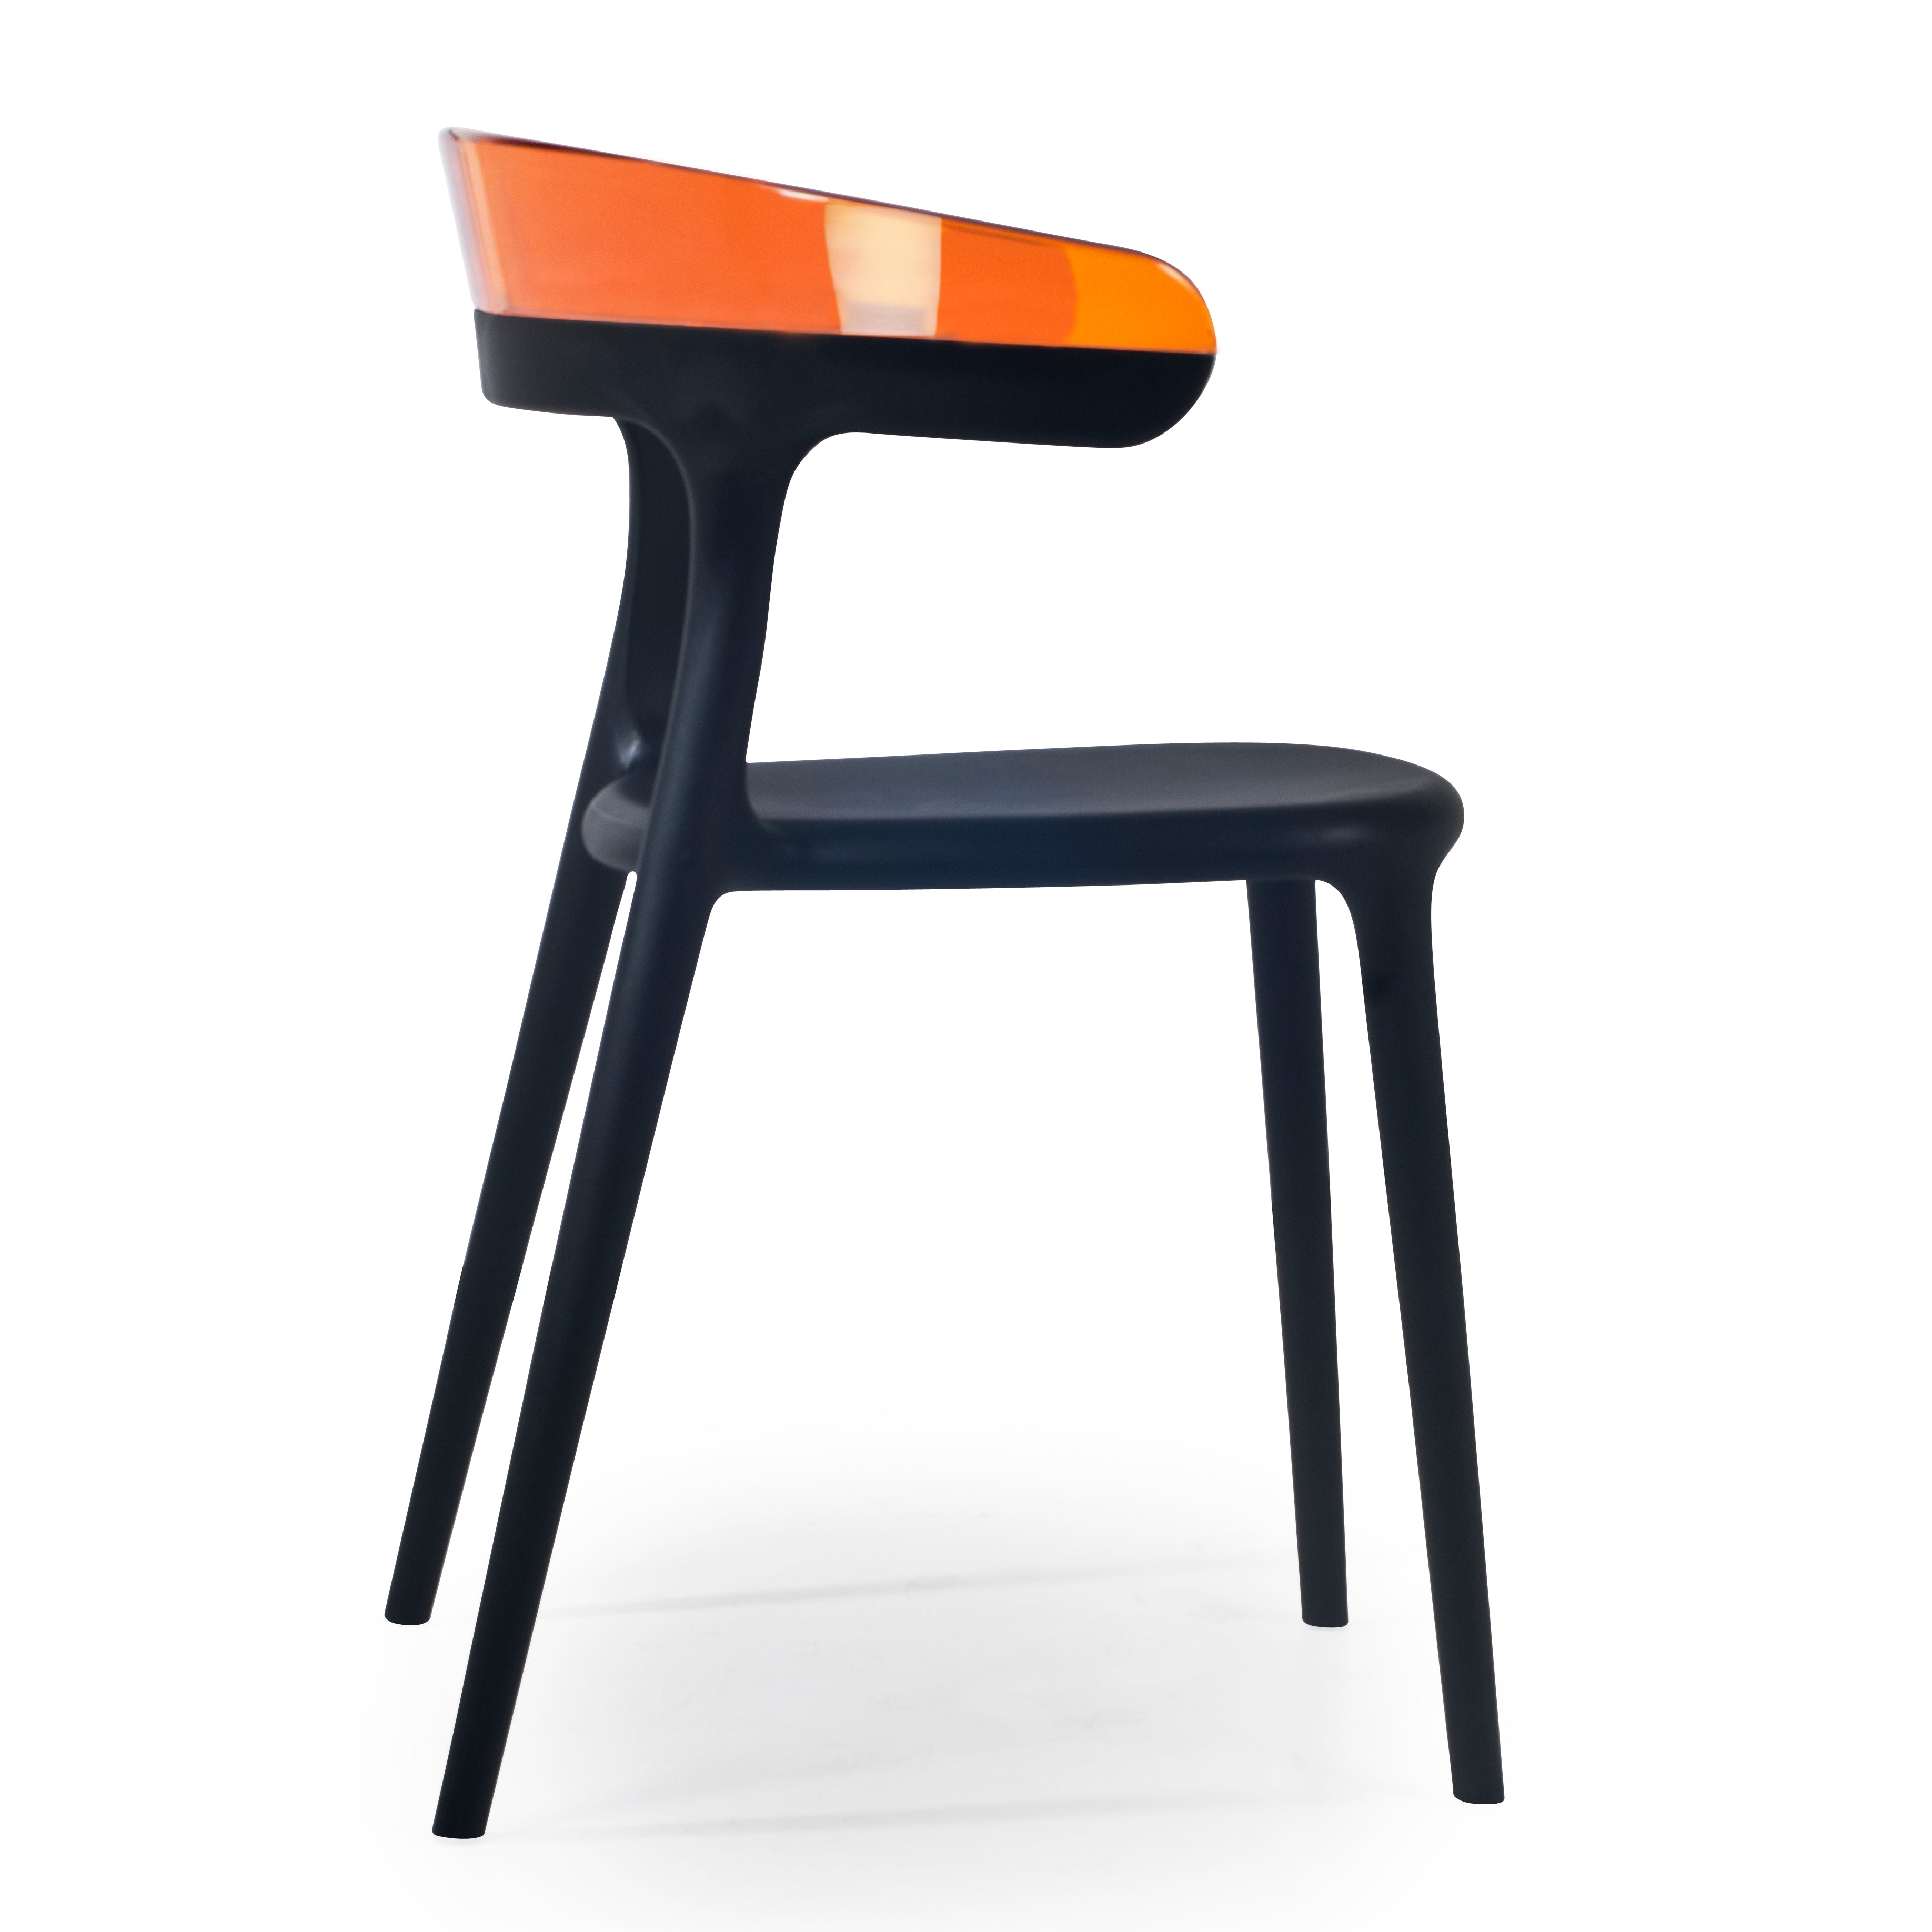 Mia Patio Dining Chair in Black and Orange- (Set of 2)